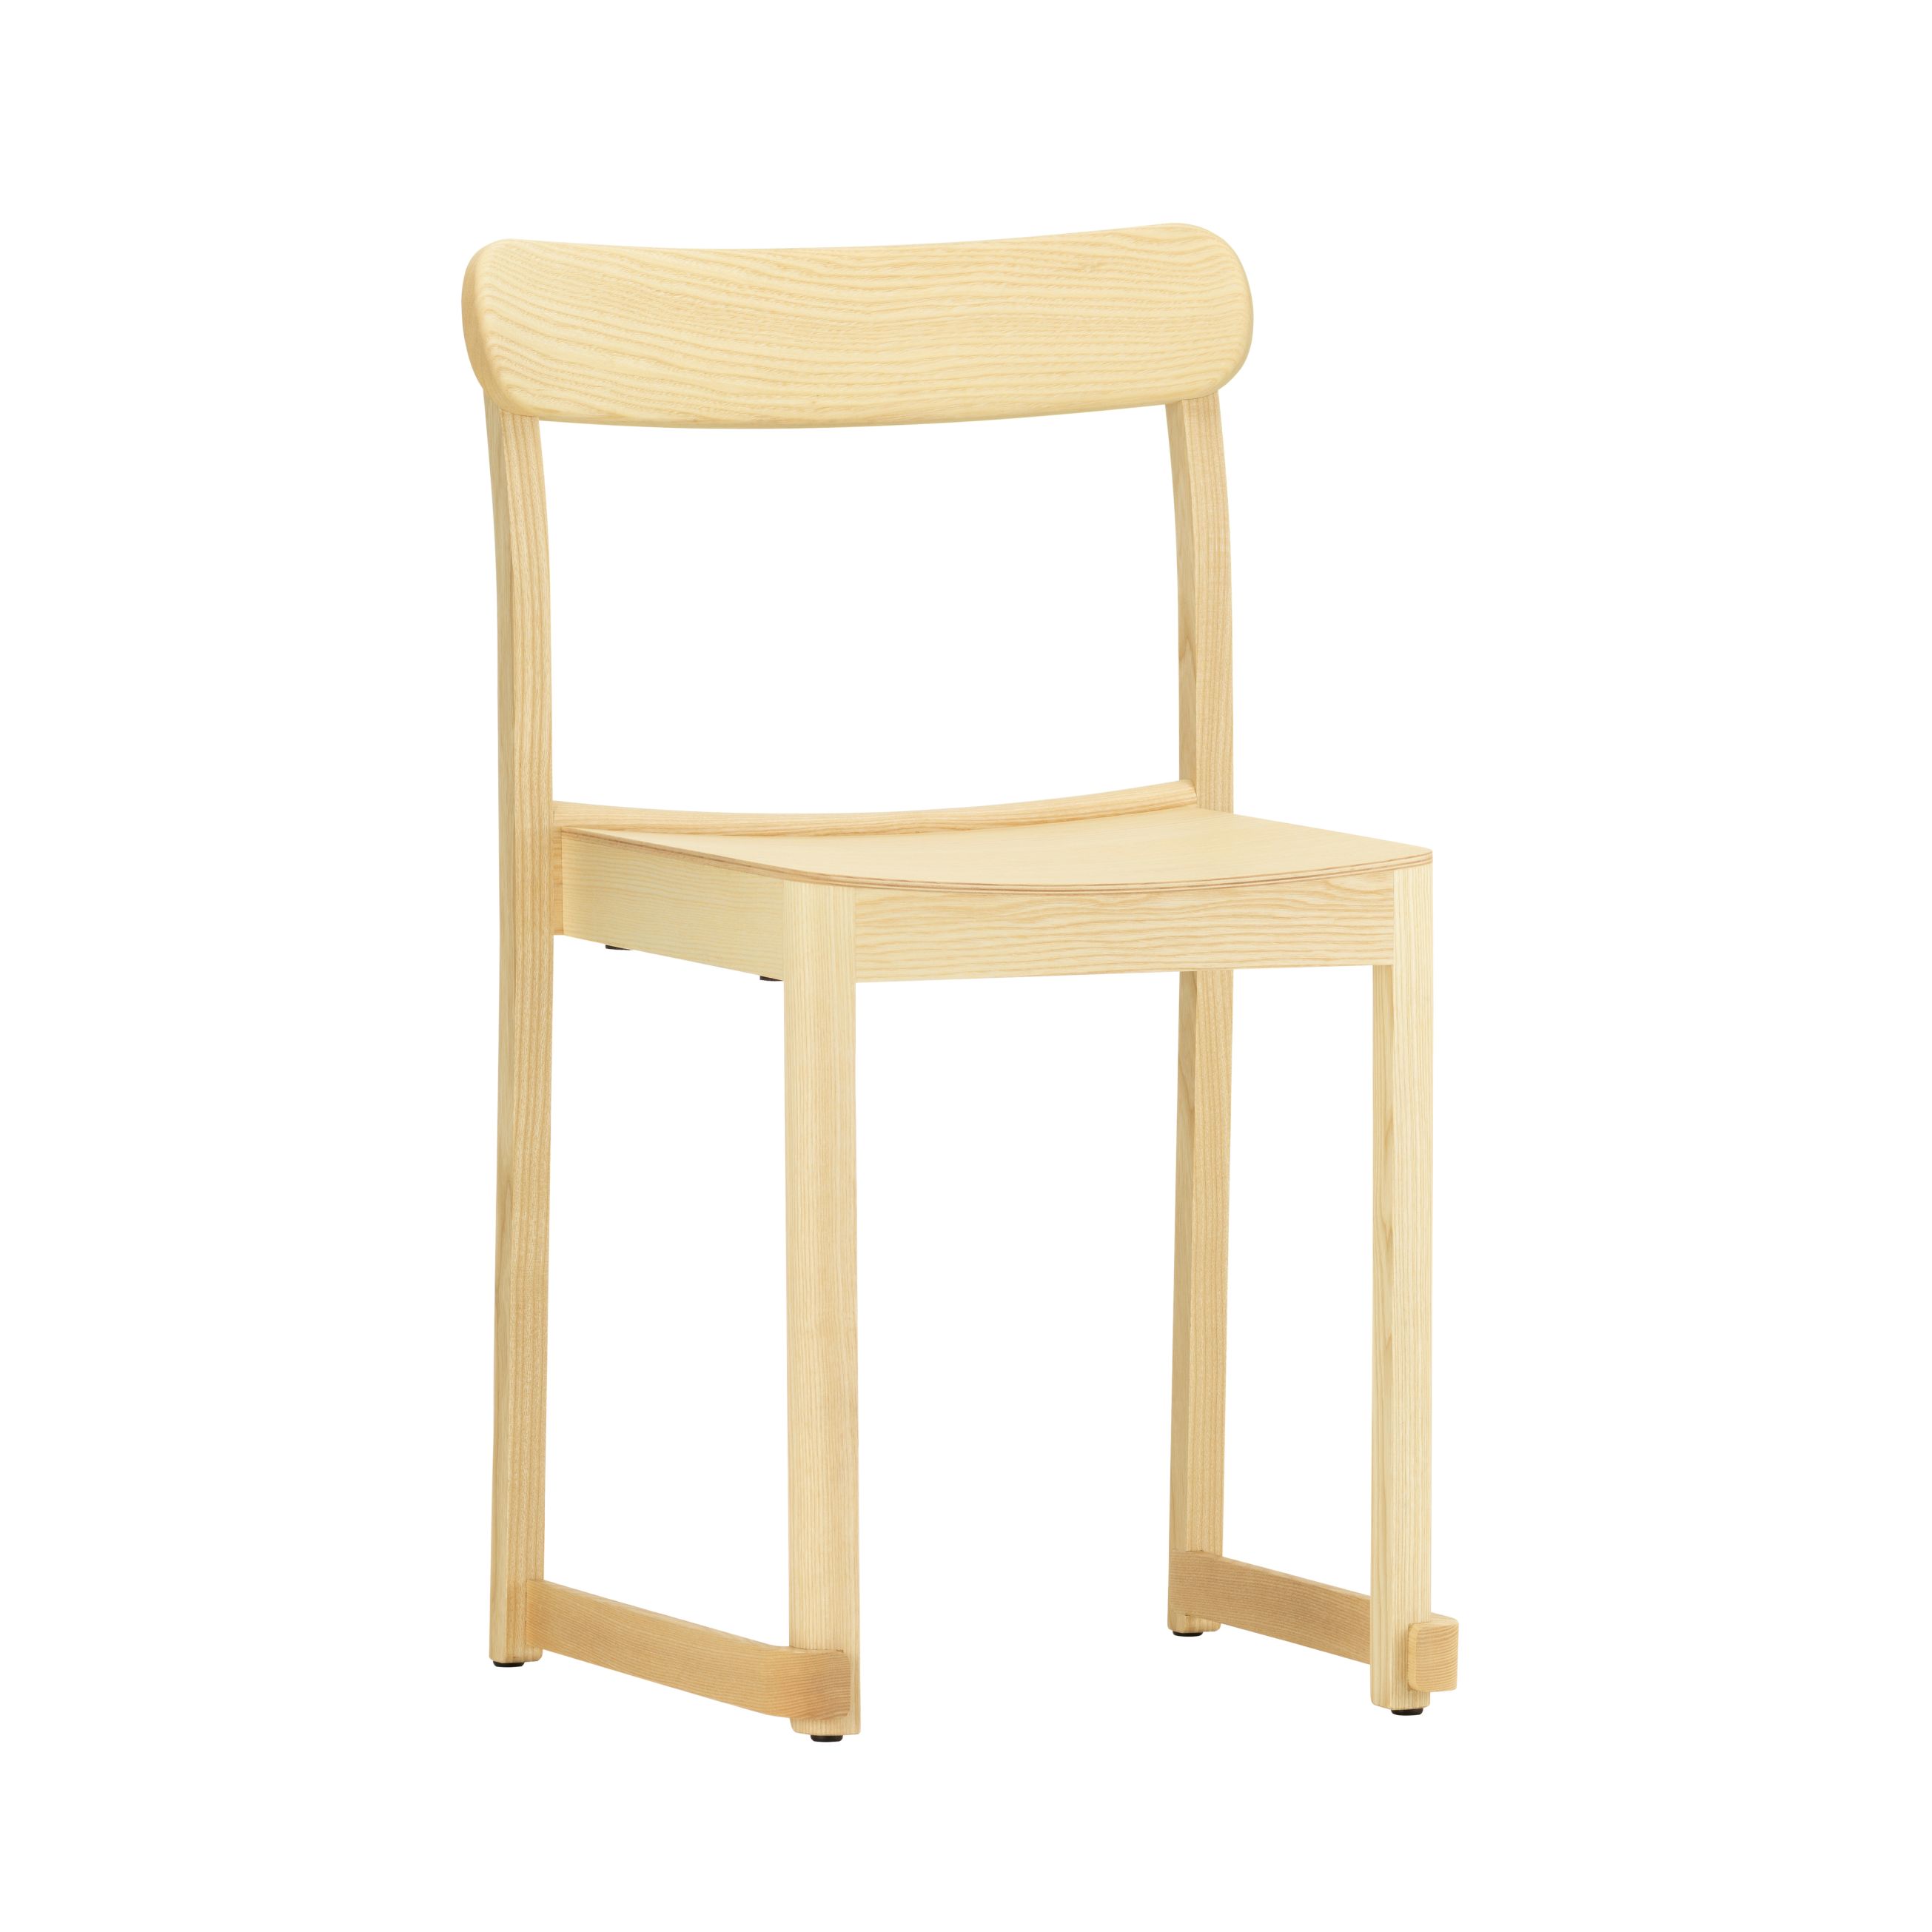 Atelier-Chair-natural-lacquered-ash_WEB-2432685